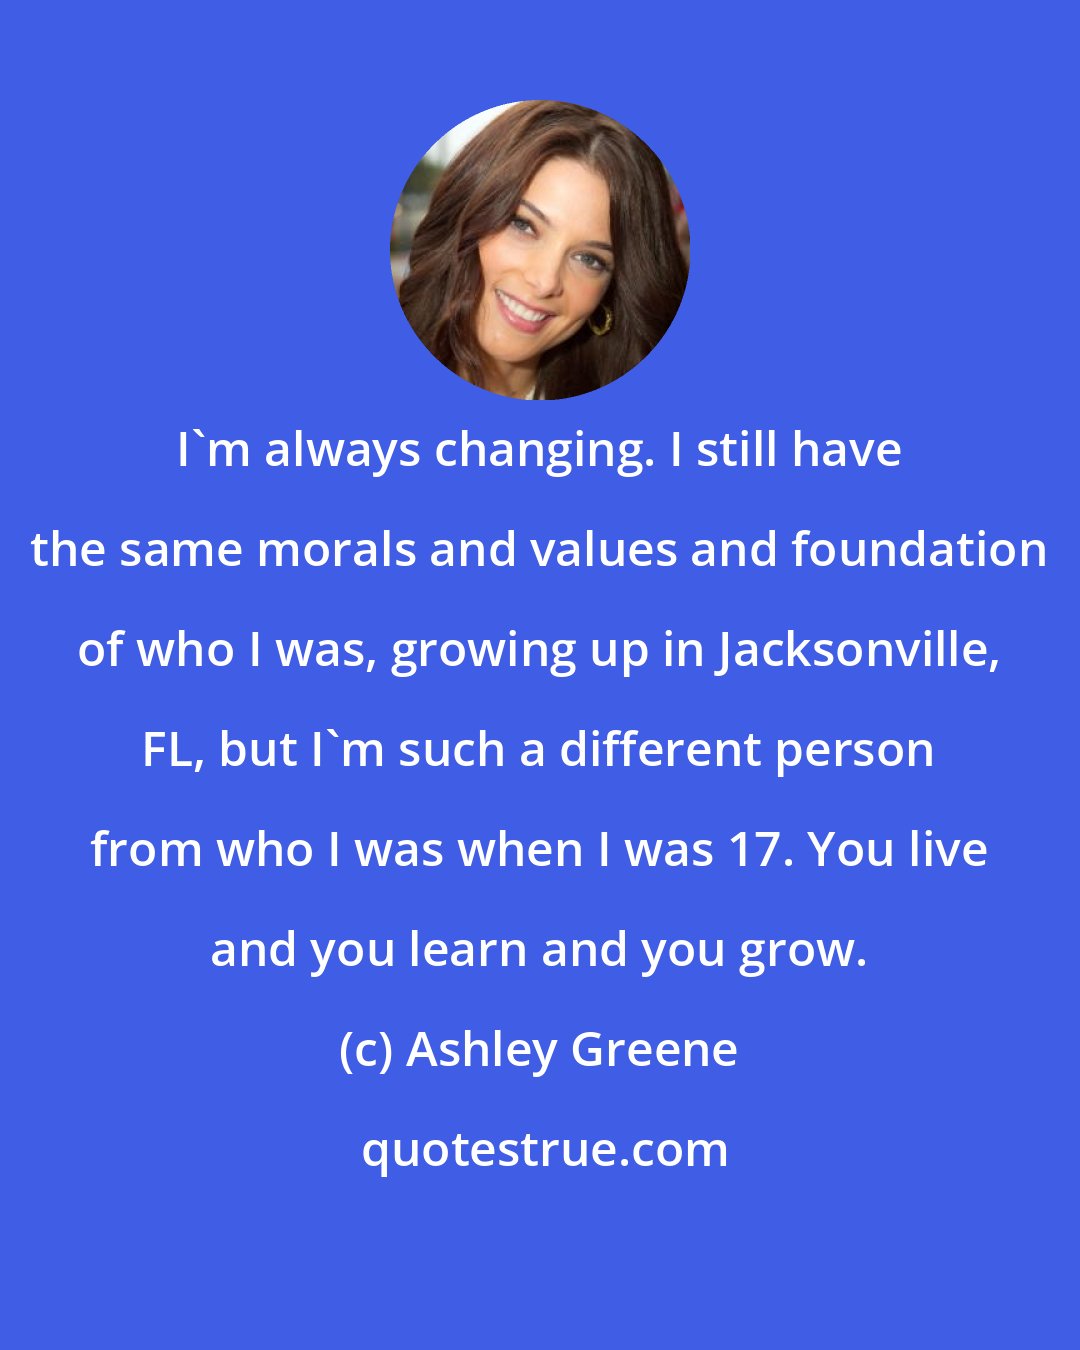 Ashley Greene: I'm always changing. I still have the same morals and values and foundation of who I was, growing up in Jacksonville, FL, but I'm such a different person from who I was when I was 17. You live and you learn and you grow.